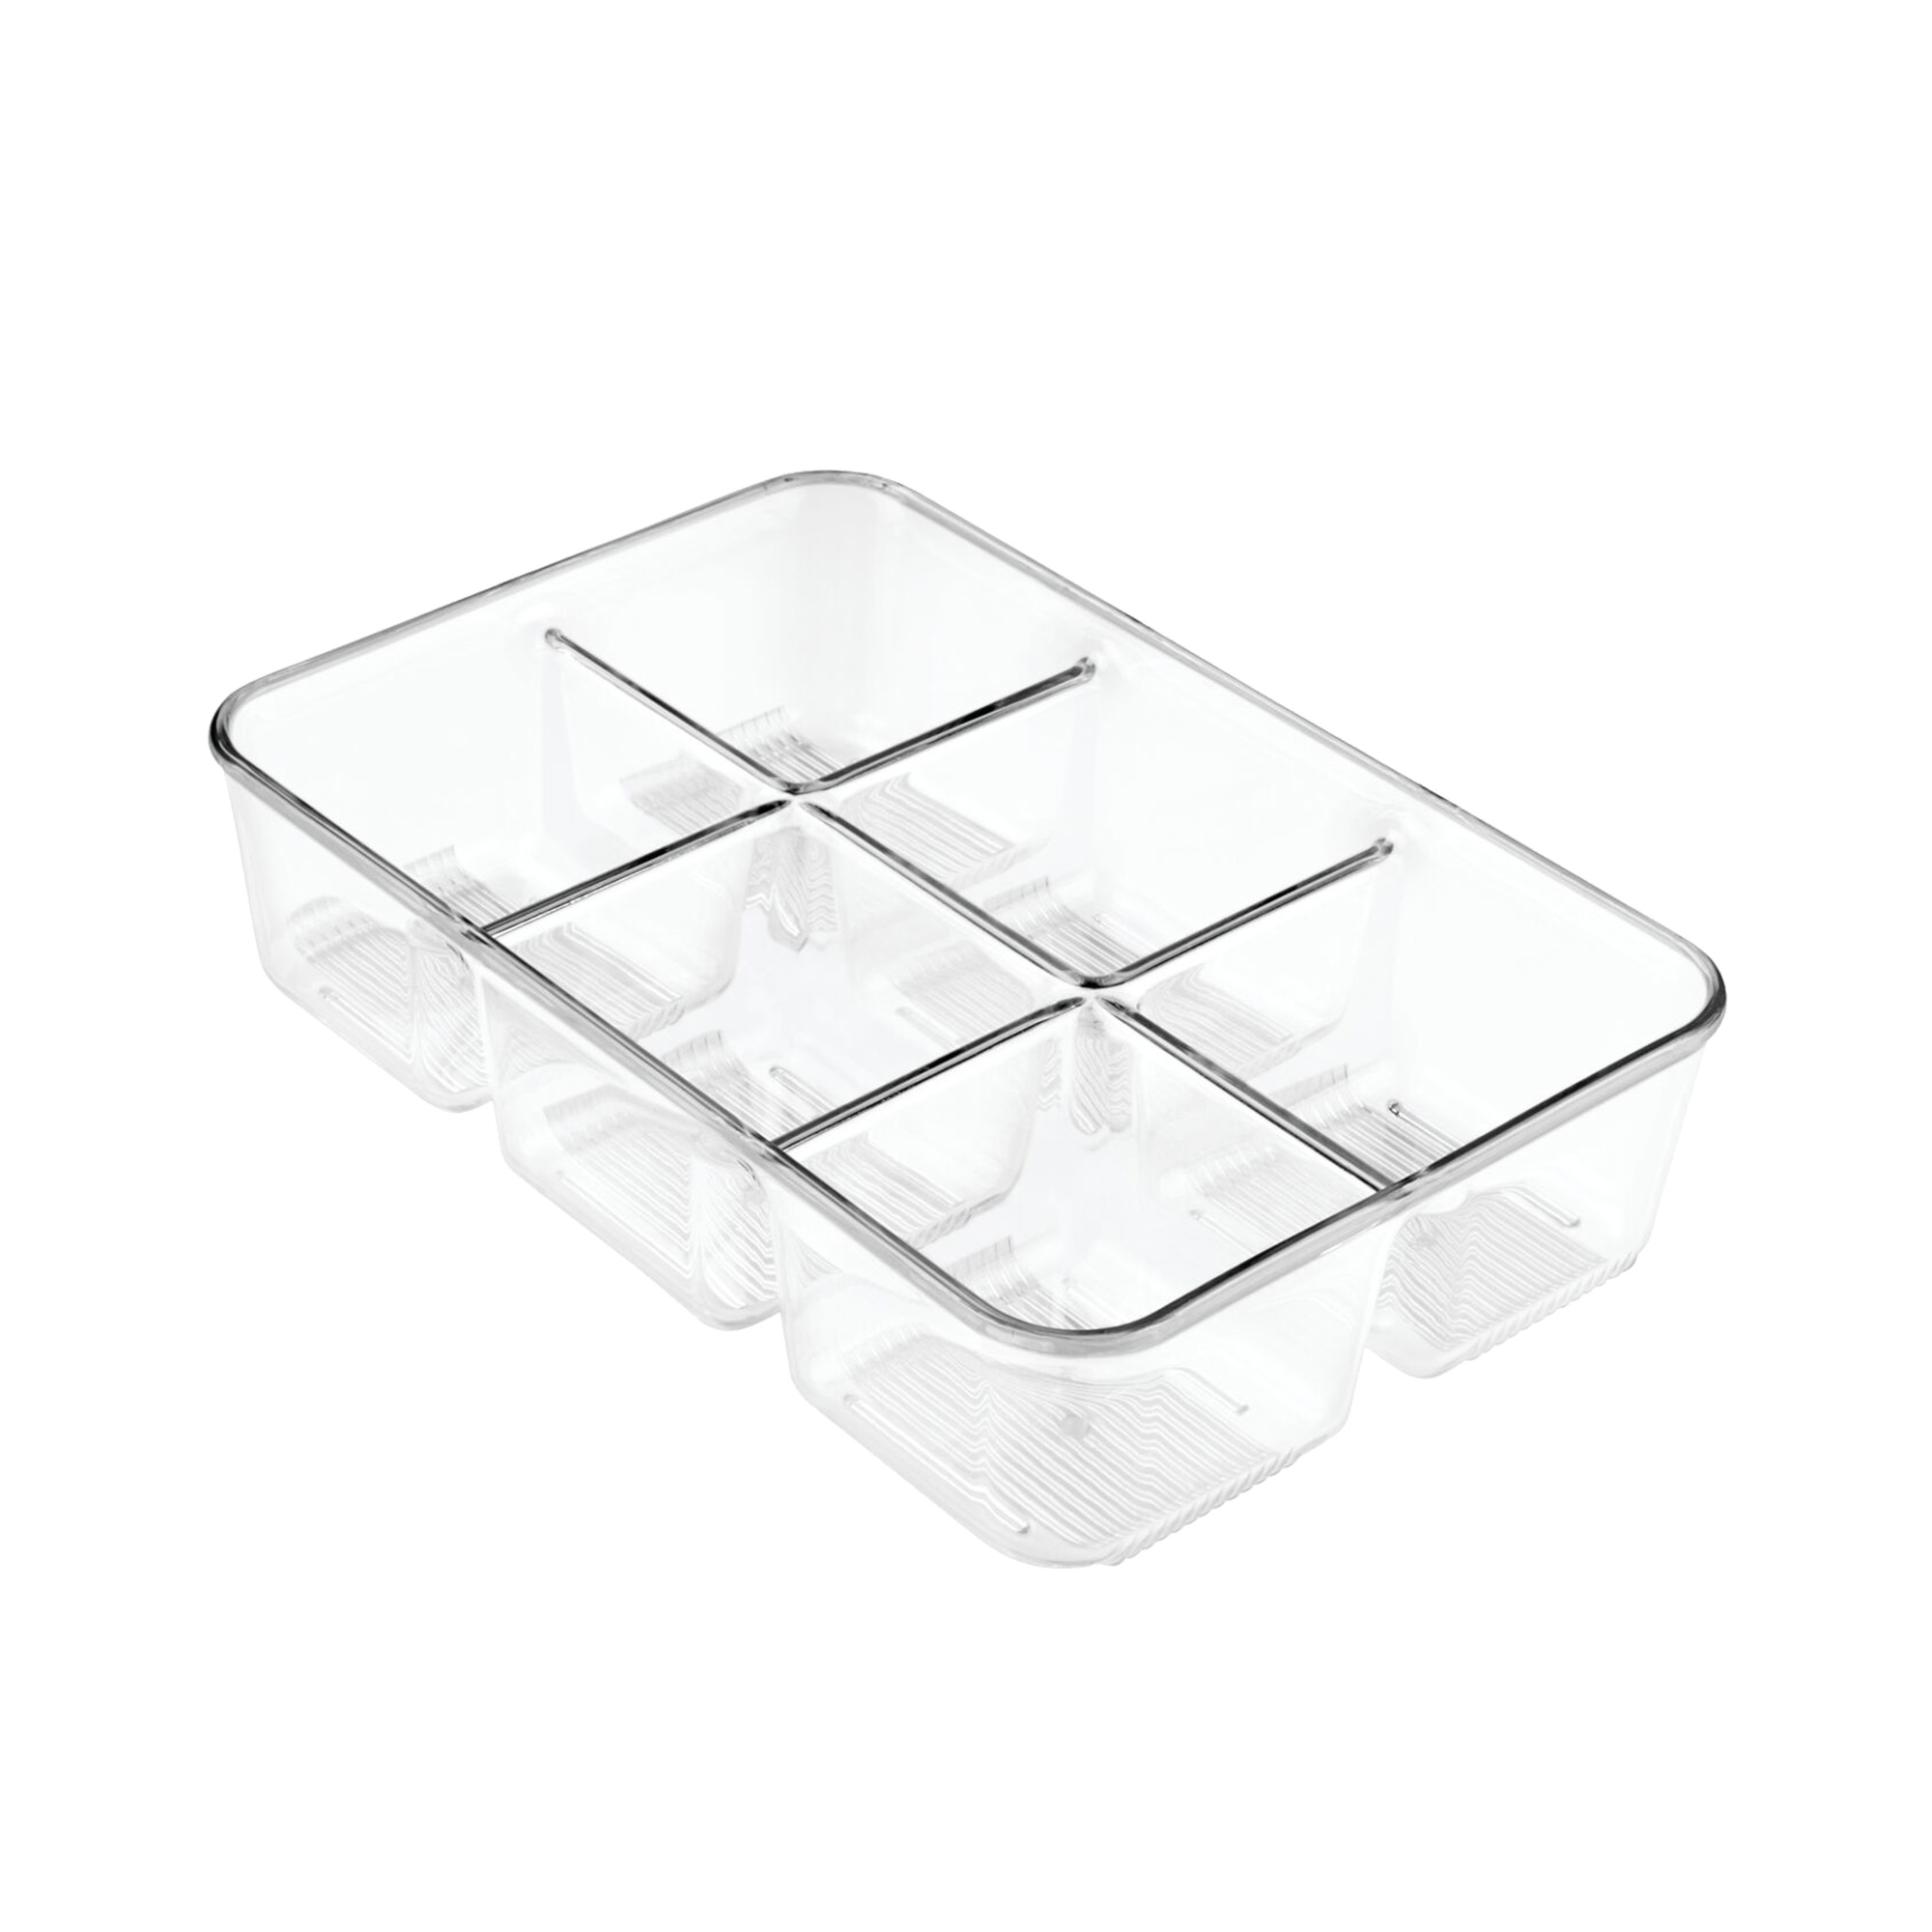 iDesign Linus Pack Organiser 6 Compartment Clear Image 1